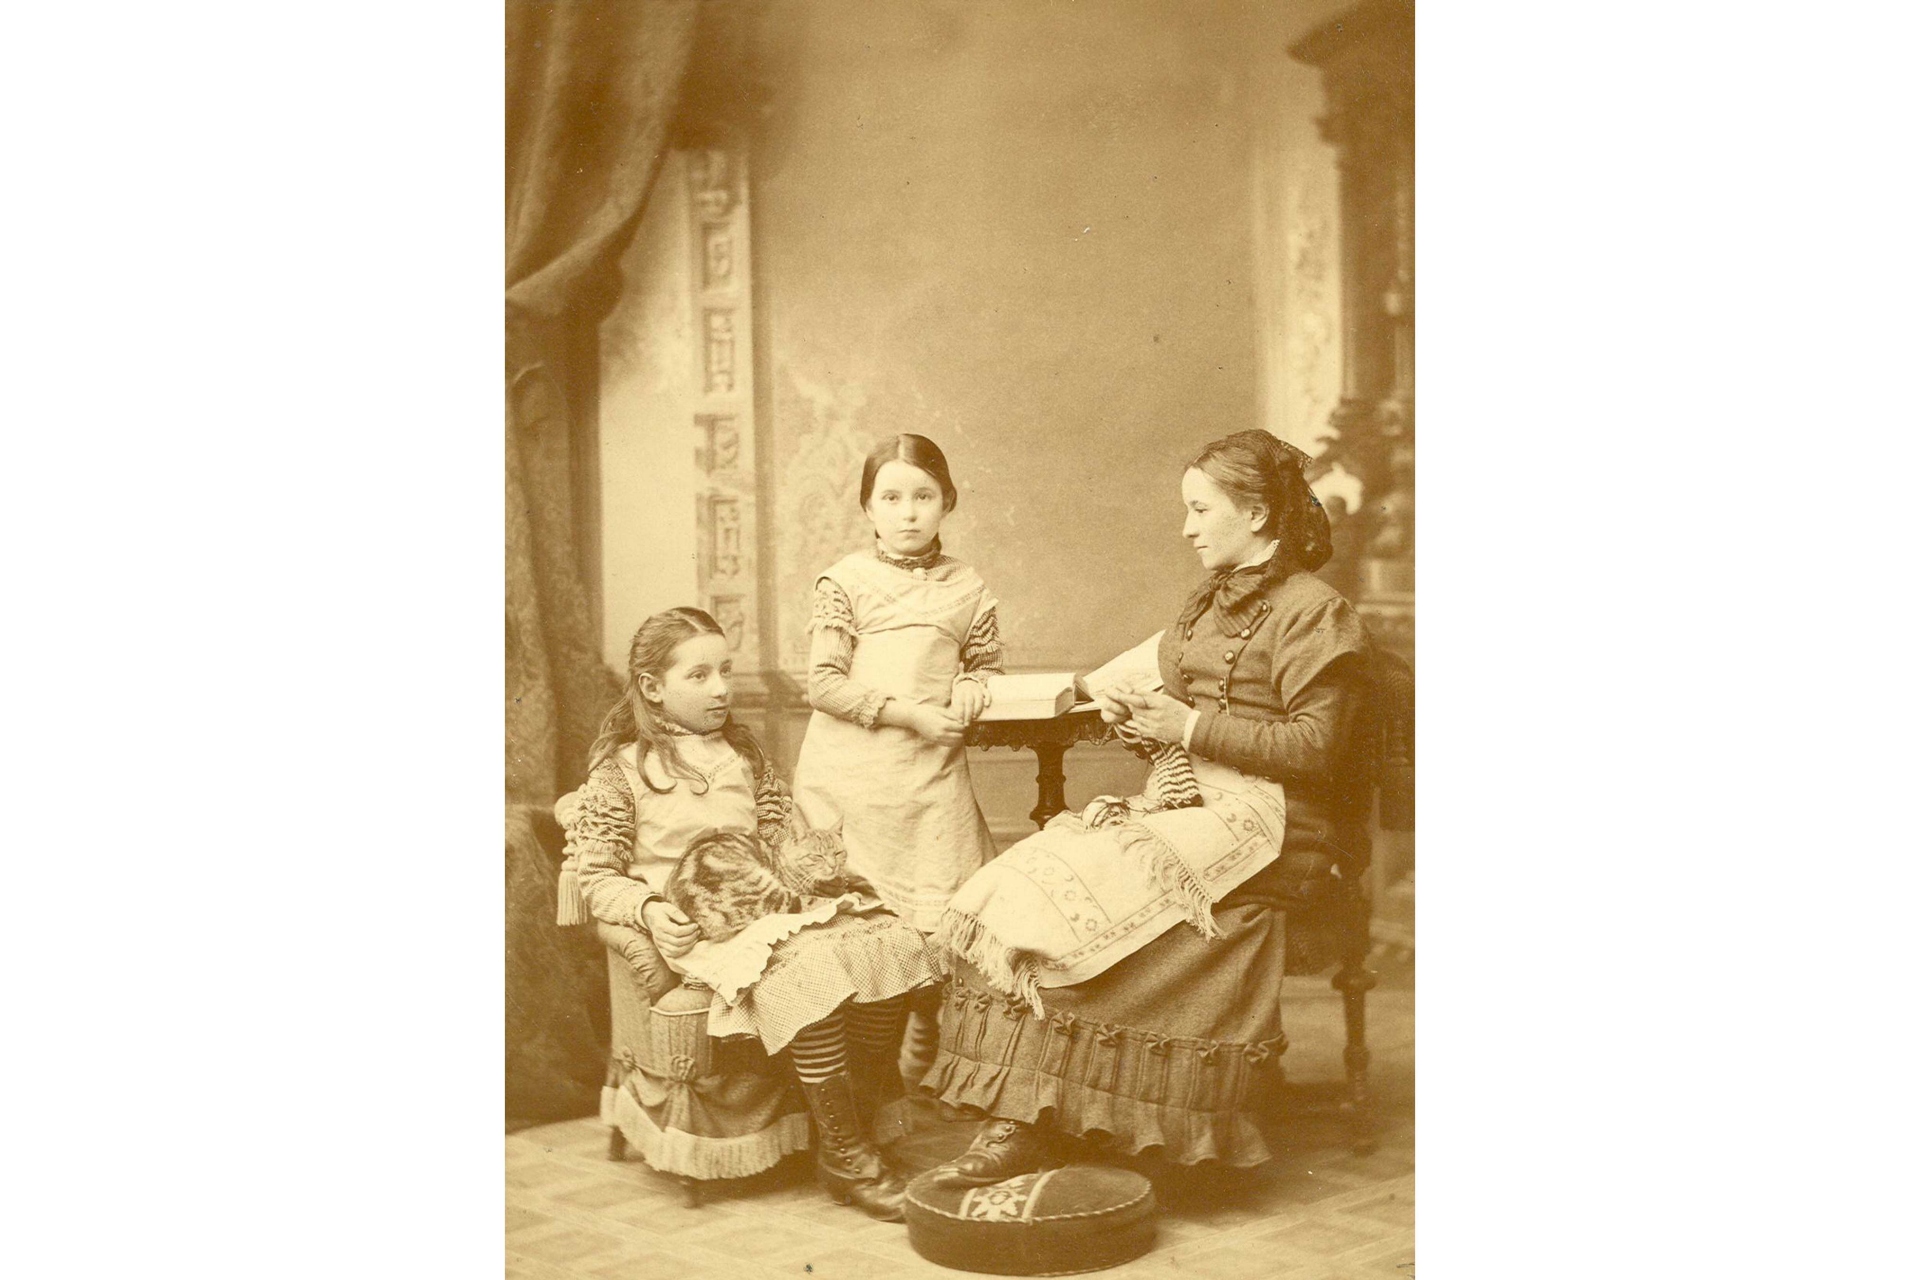 Else Abbe with her daughters Paula and Grete.